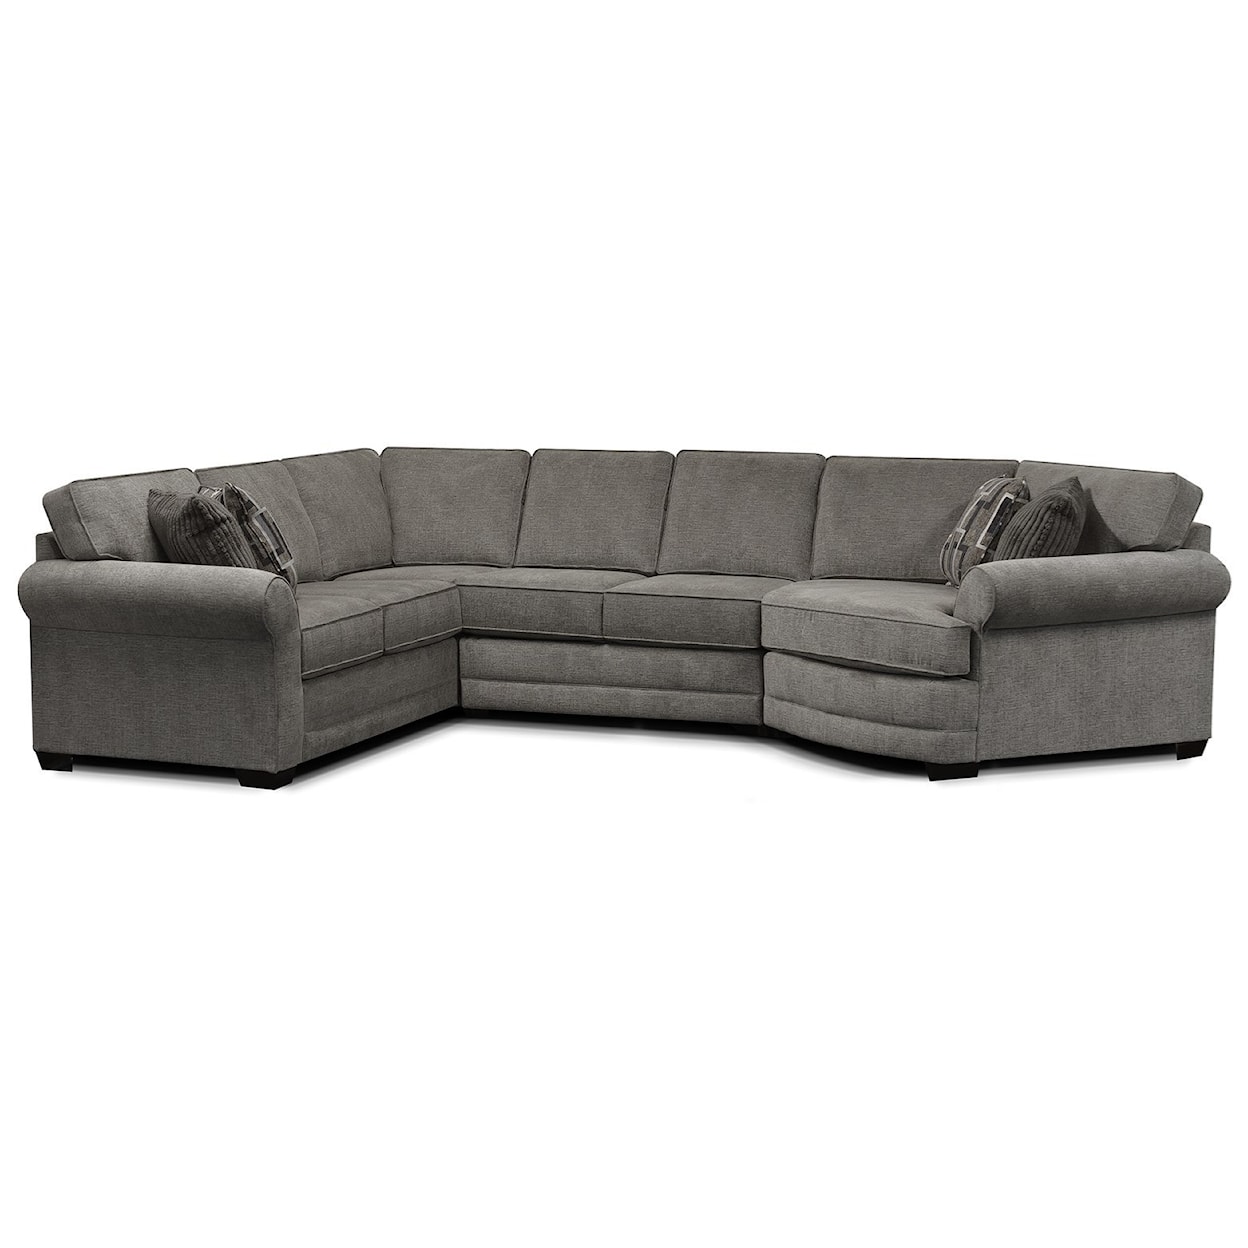 Tennessee Custom Upholstery 5630 Series 4-Piece Sectional Sofa Cuddler